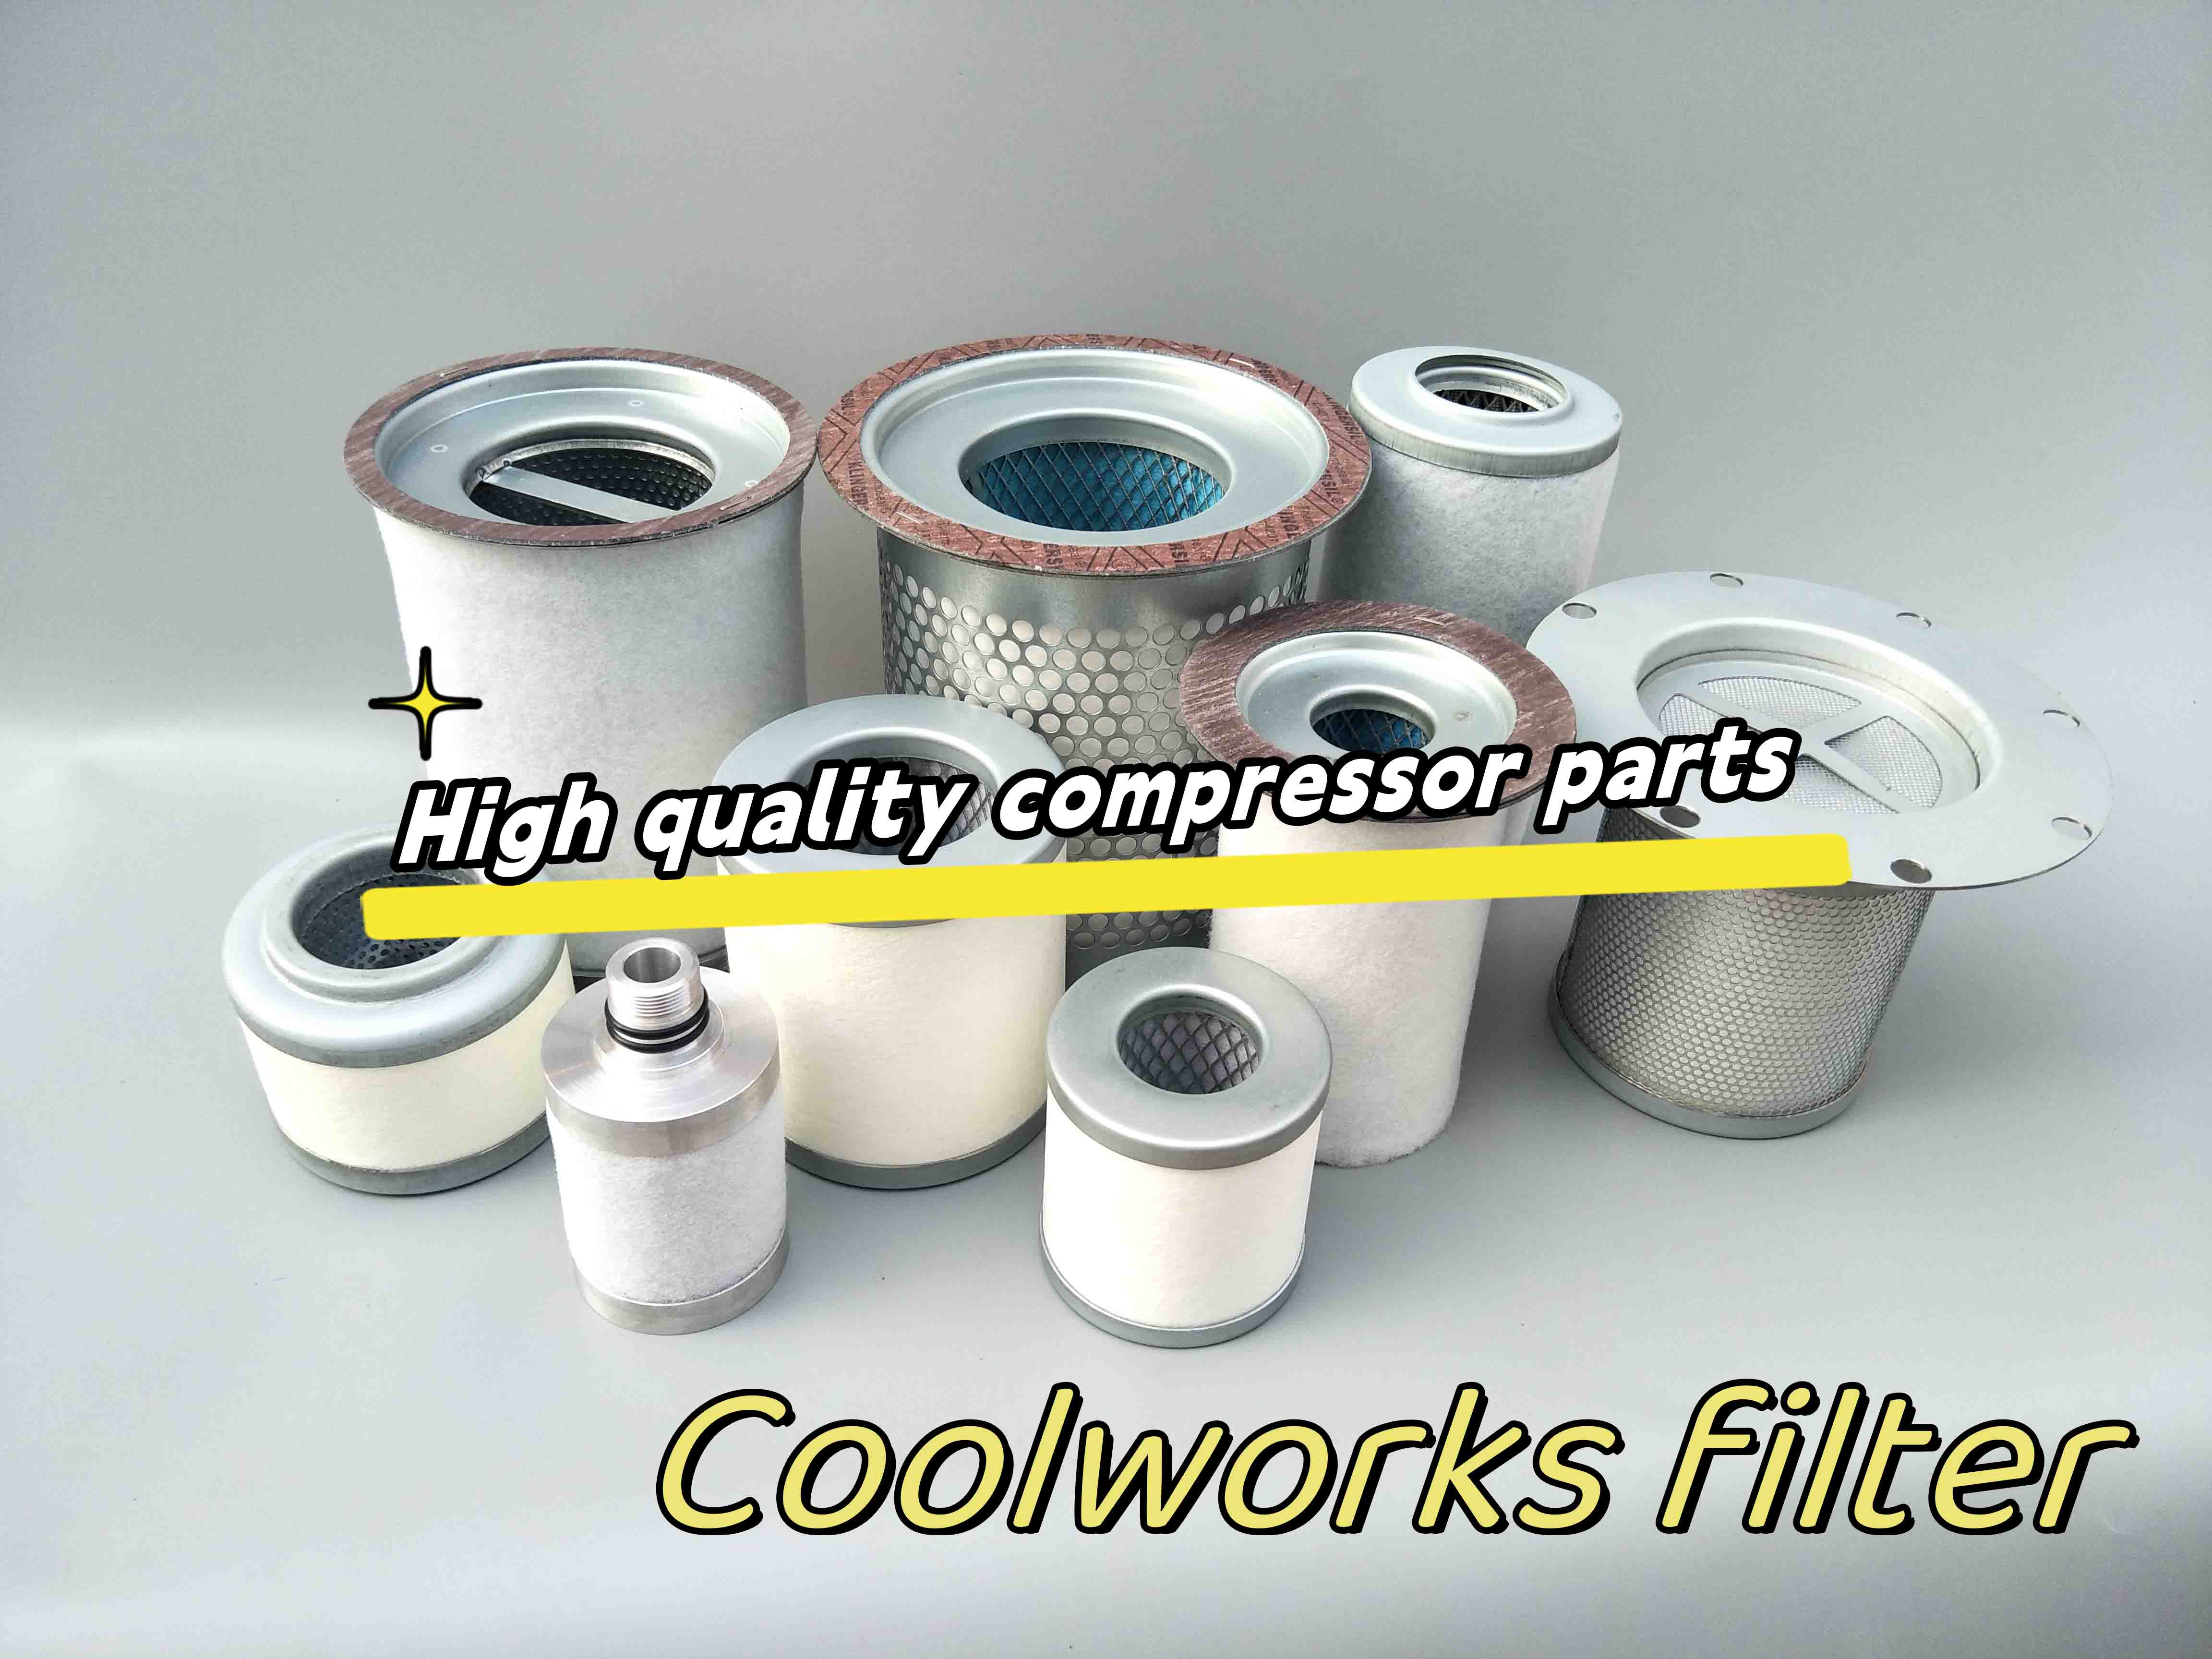 Coolworks High quality air compressor filter.